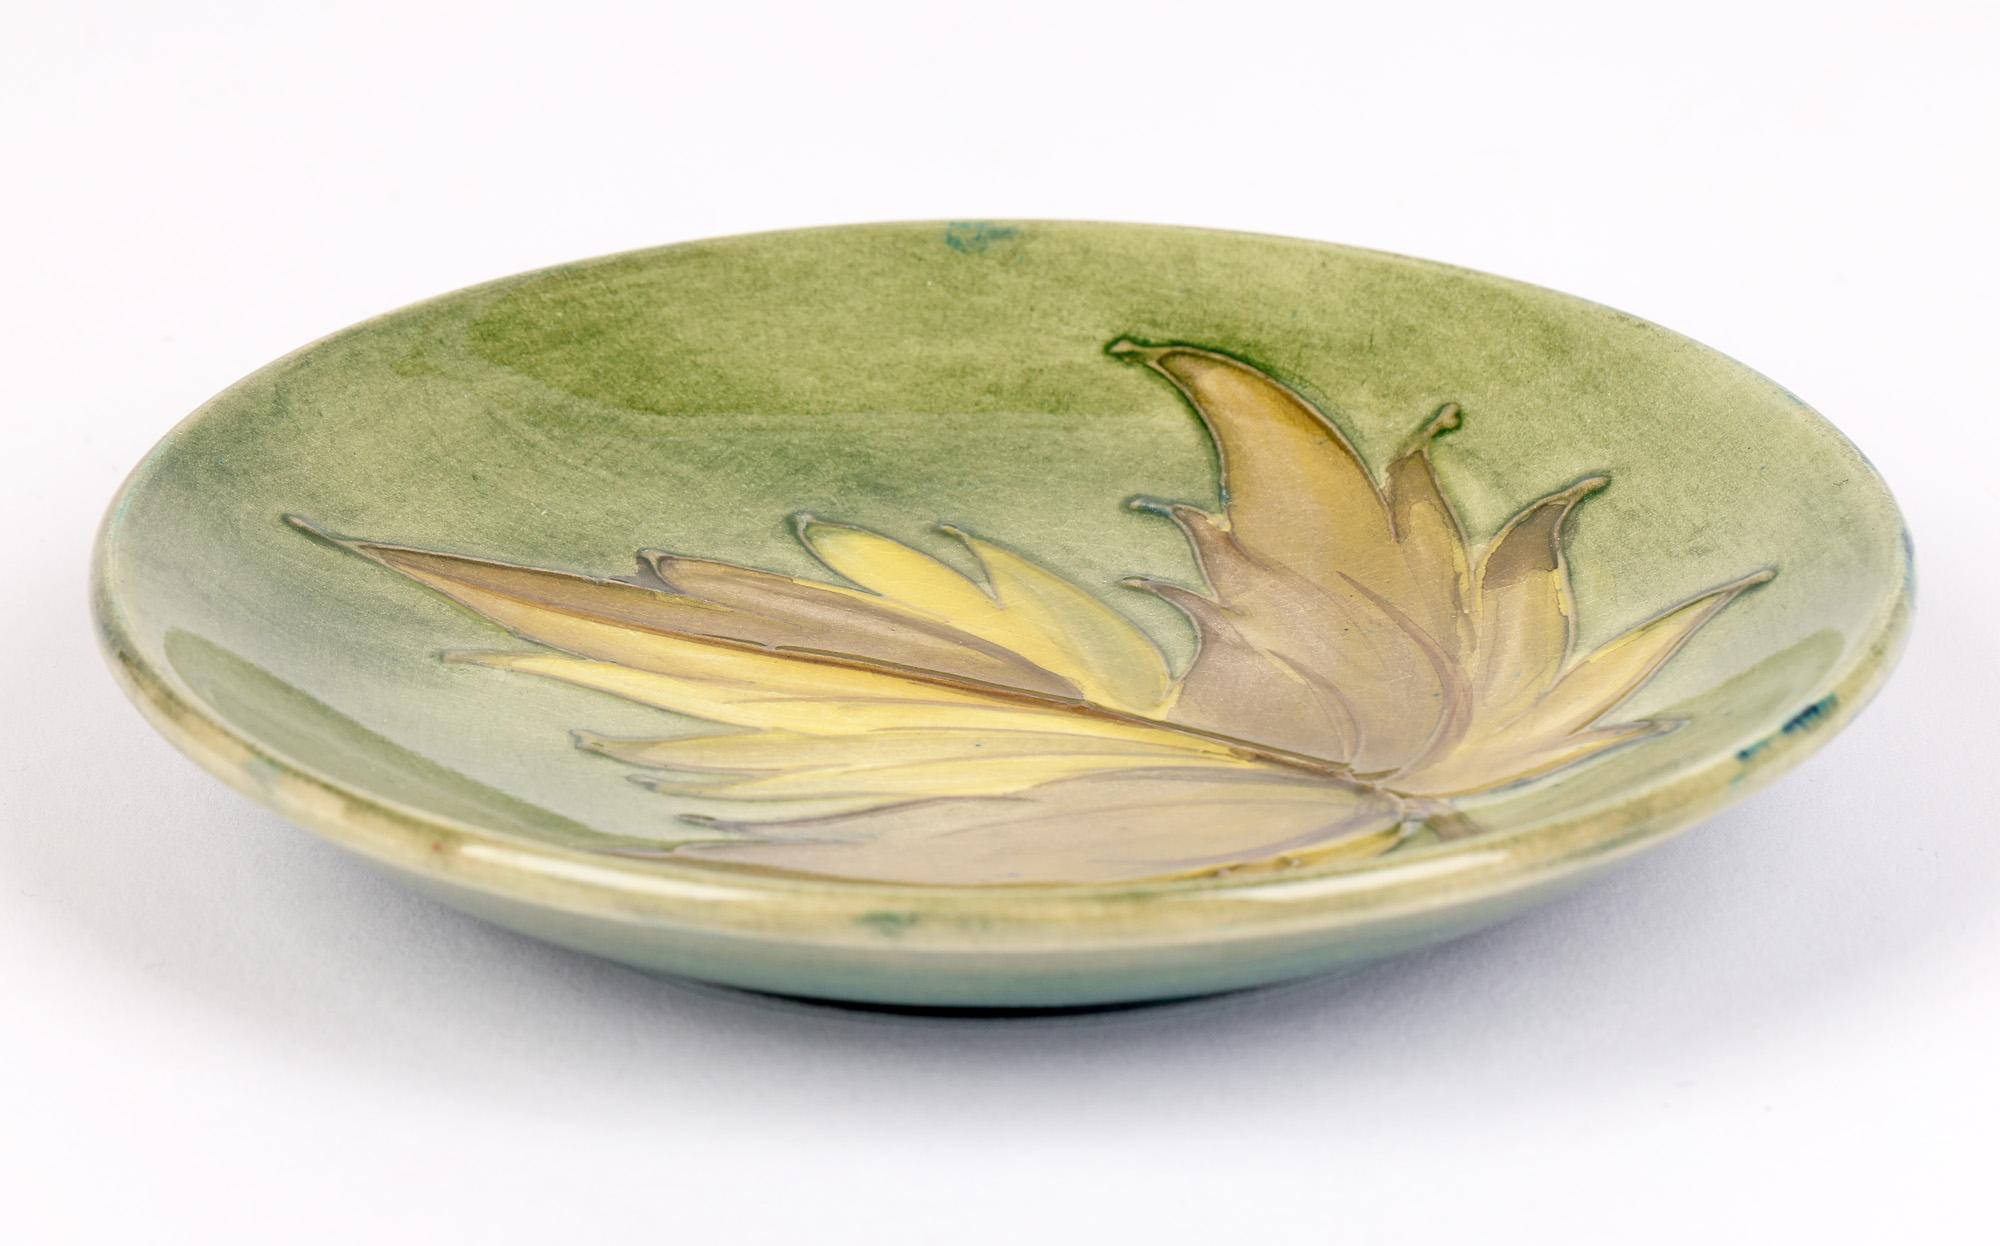 A finely made Art Deco Moorcroft tubelined pin dish decorated with a leaf dating from around 1930. The ceramic dish is of simple round shape with a raised edge and stands raised on a narrow round foot. The dish is decorated with a tubelined leaf